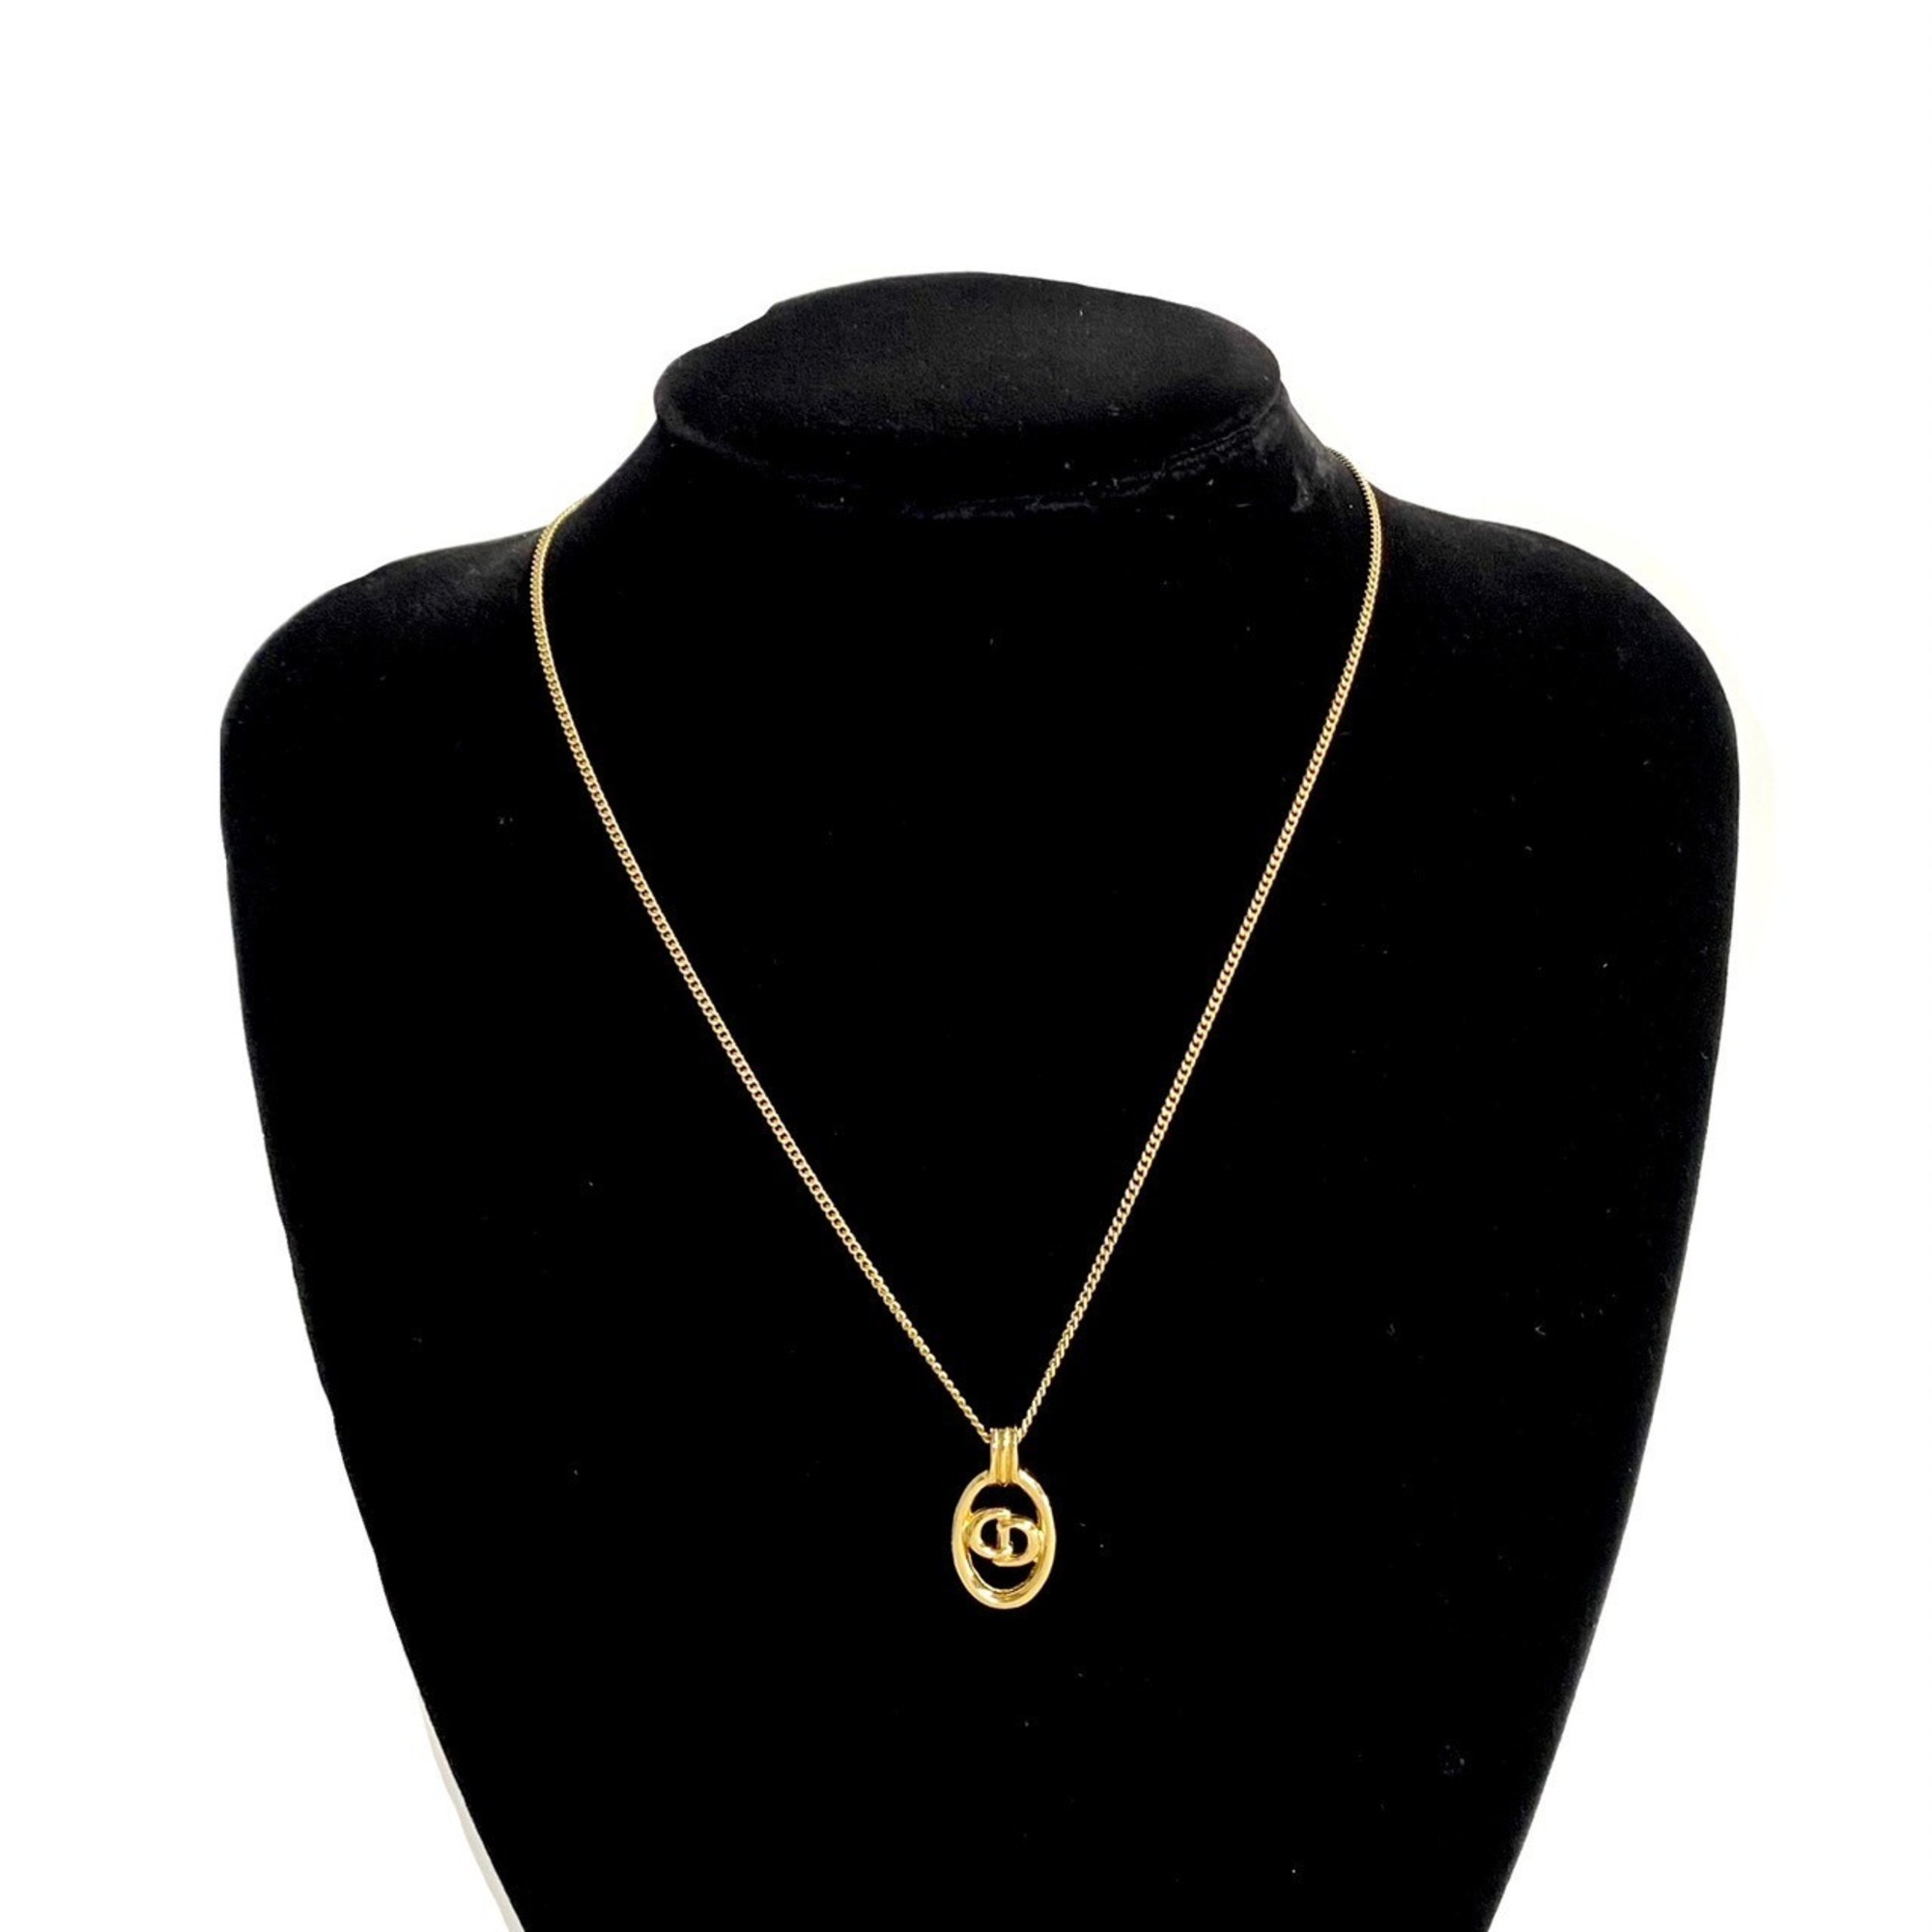 Christian Dior CD Chain Necklace Pendant Gold 36963